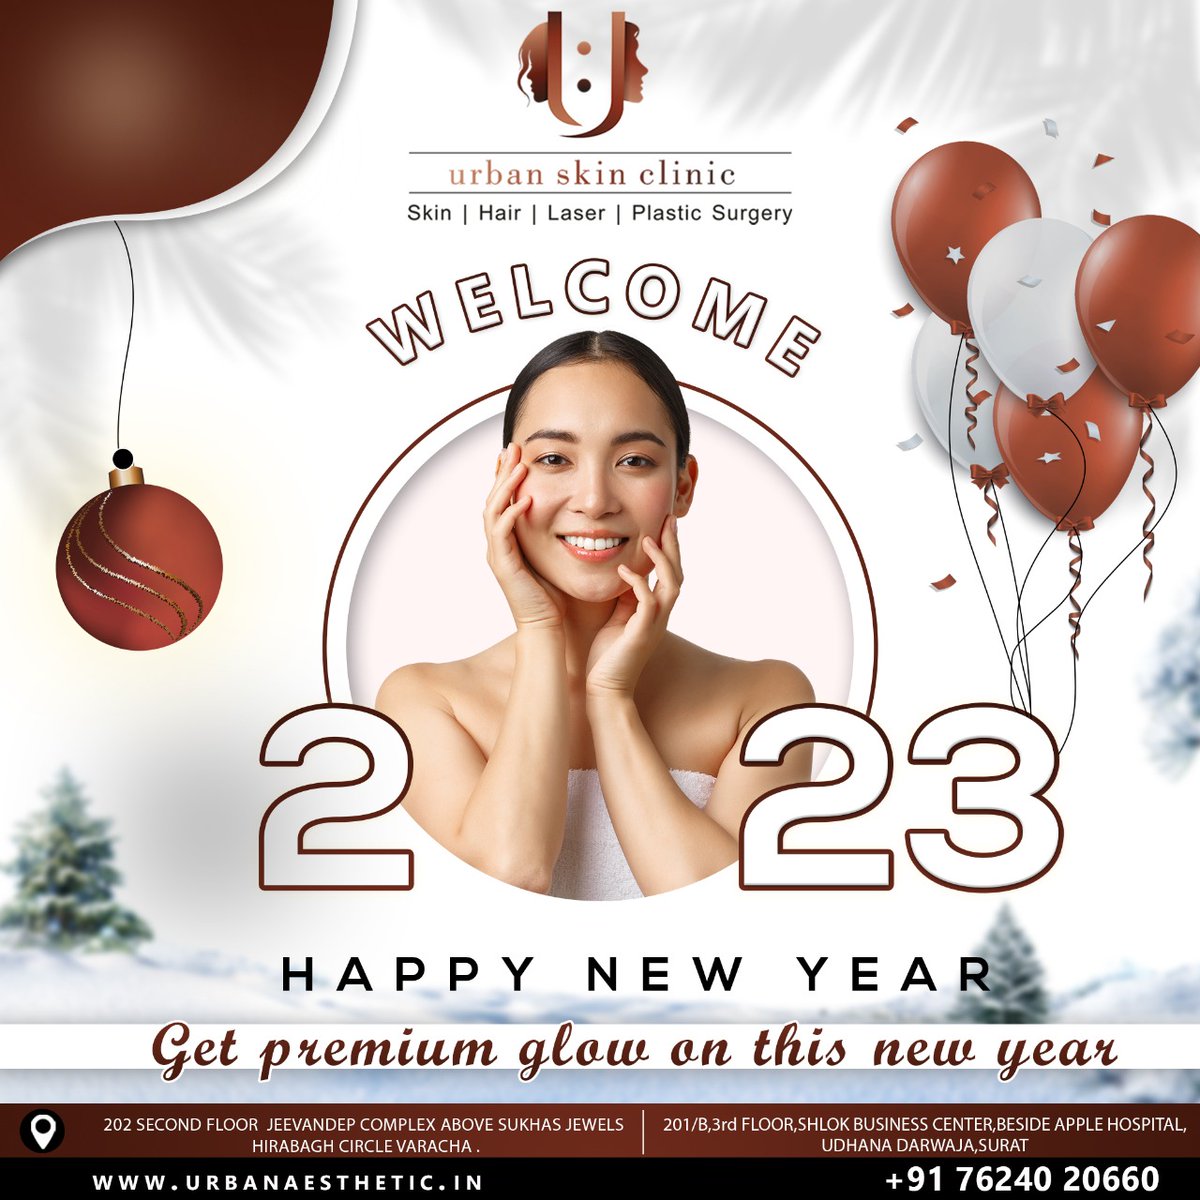 WELCOME 2023😍

HAPPY NEW YEAR🎉

#happynewyear2023 #carbónfacial #facialtreatment #facelifting #tightenskin #skinglow #skintreatment #facialtreatment #faceglow #faceglowbeauty #skincare #lasertreatment #PlasticSurgery #CosmeticSurgery #facemakeover #face #skincare #Surat